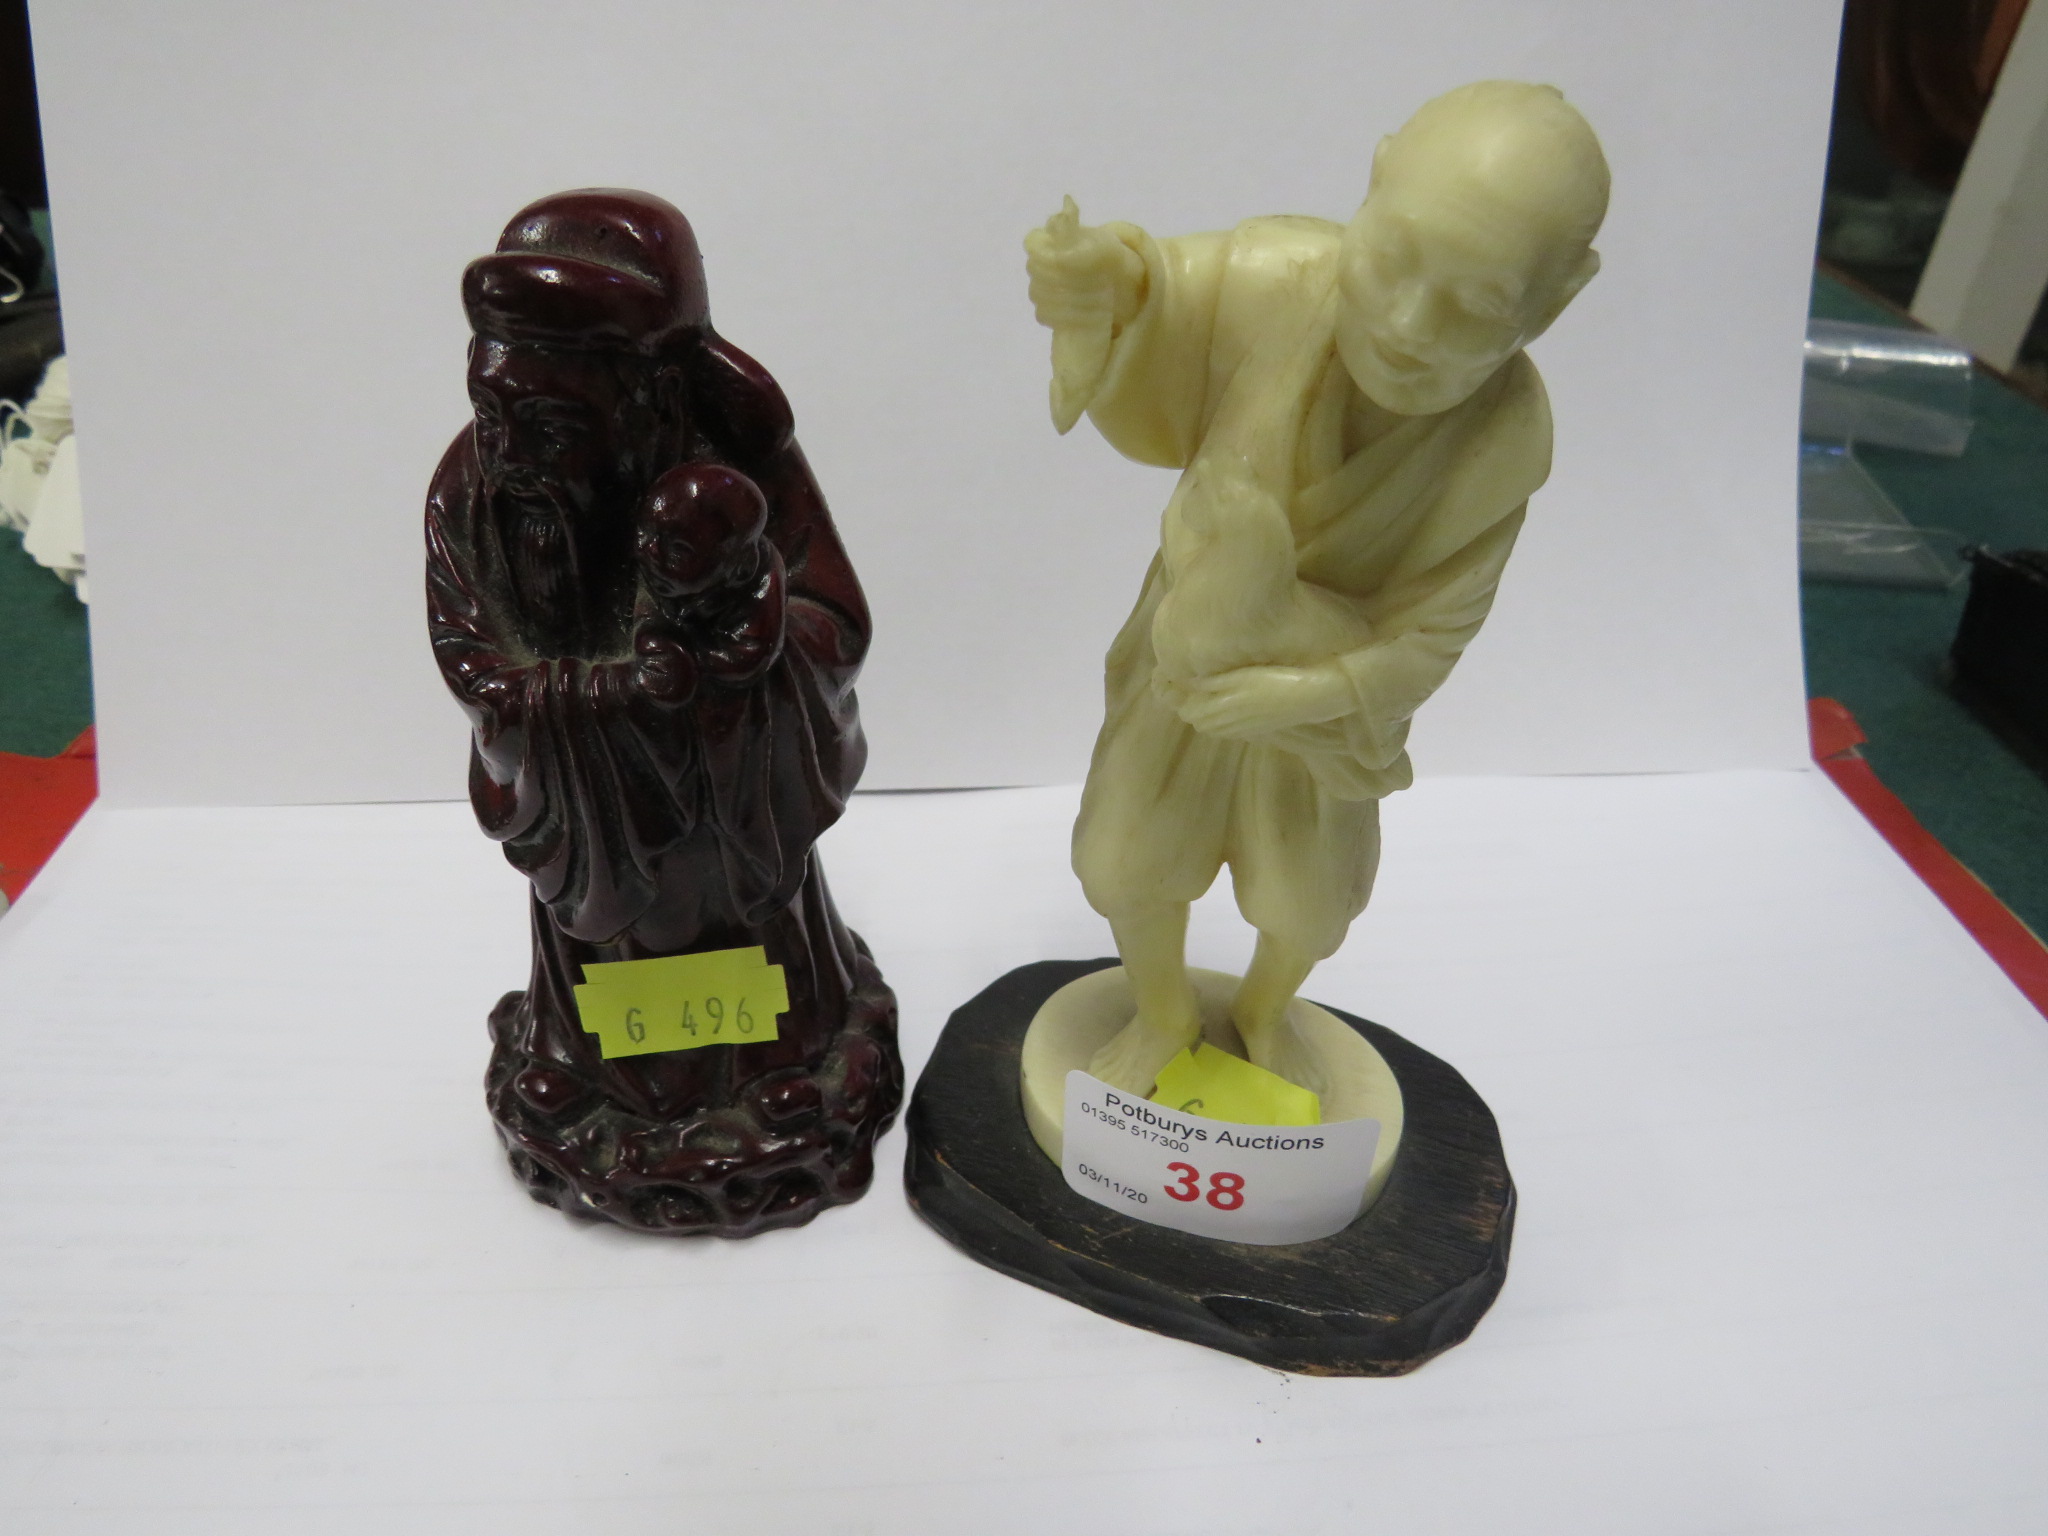 CHINESE STYLE RESIN FIGURE OF MAN WITH CHICKEN, AND DARK RED RESIN FIGURE OF ROBED WISE MAN WITH